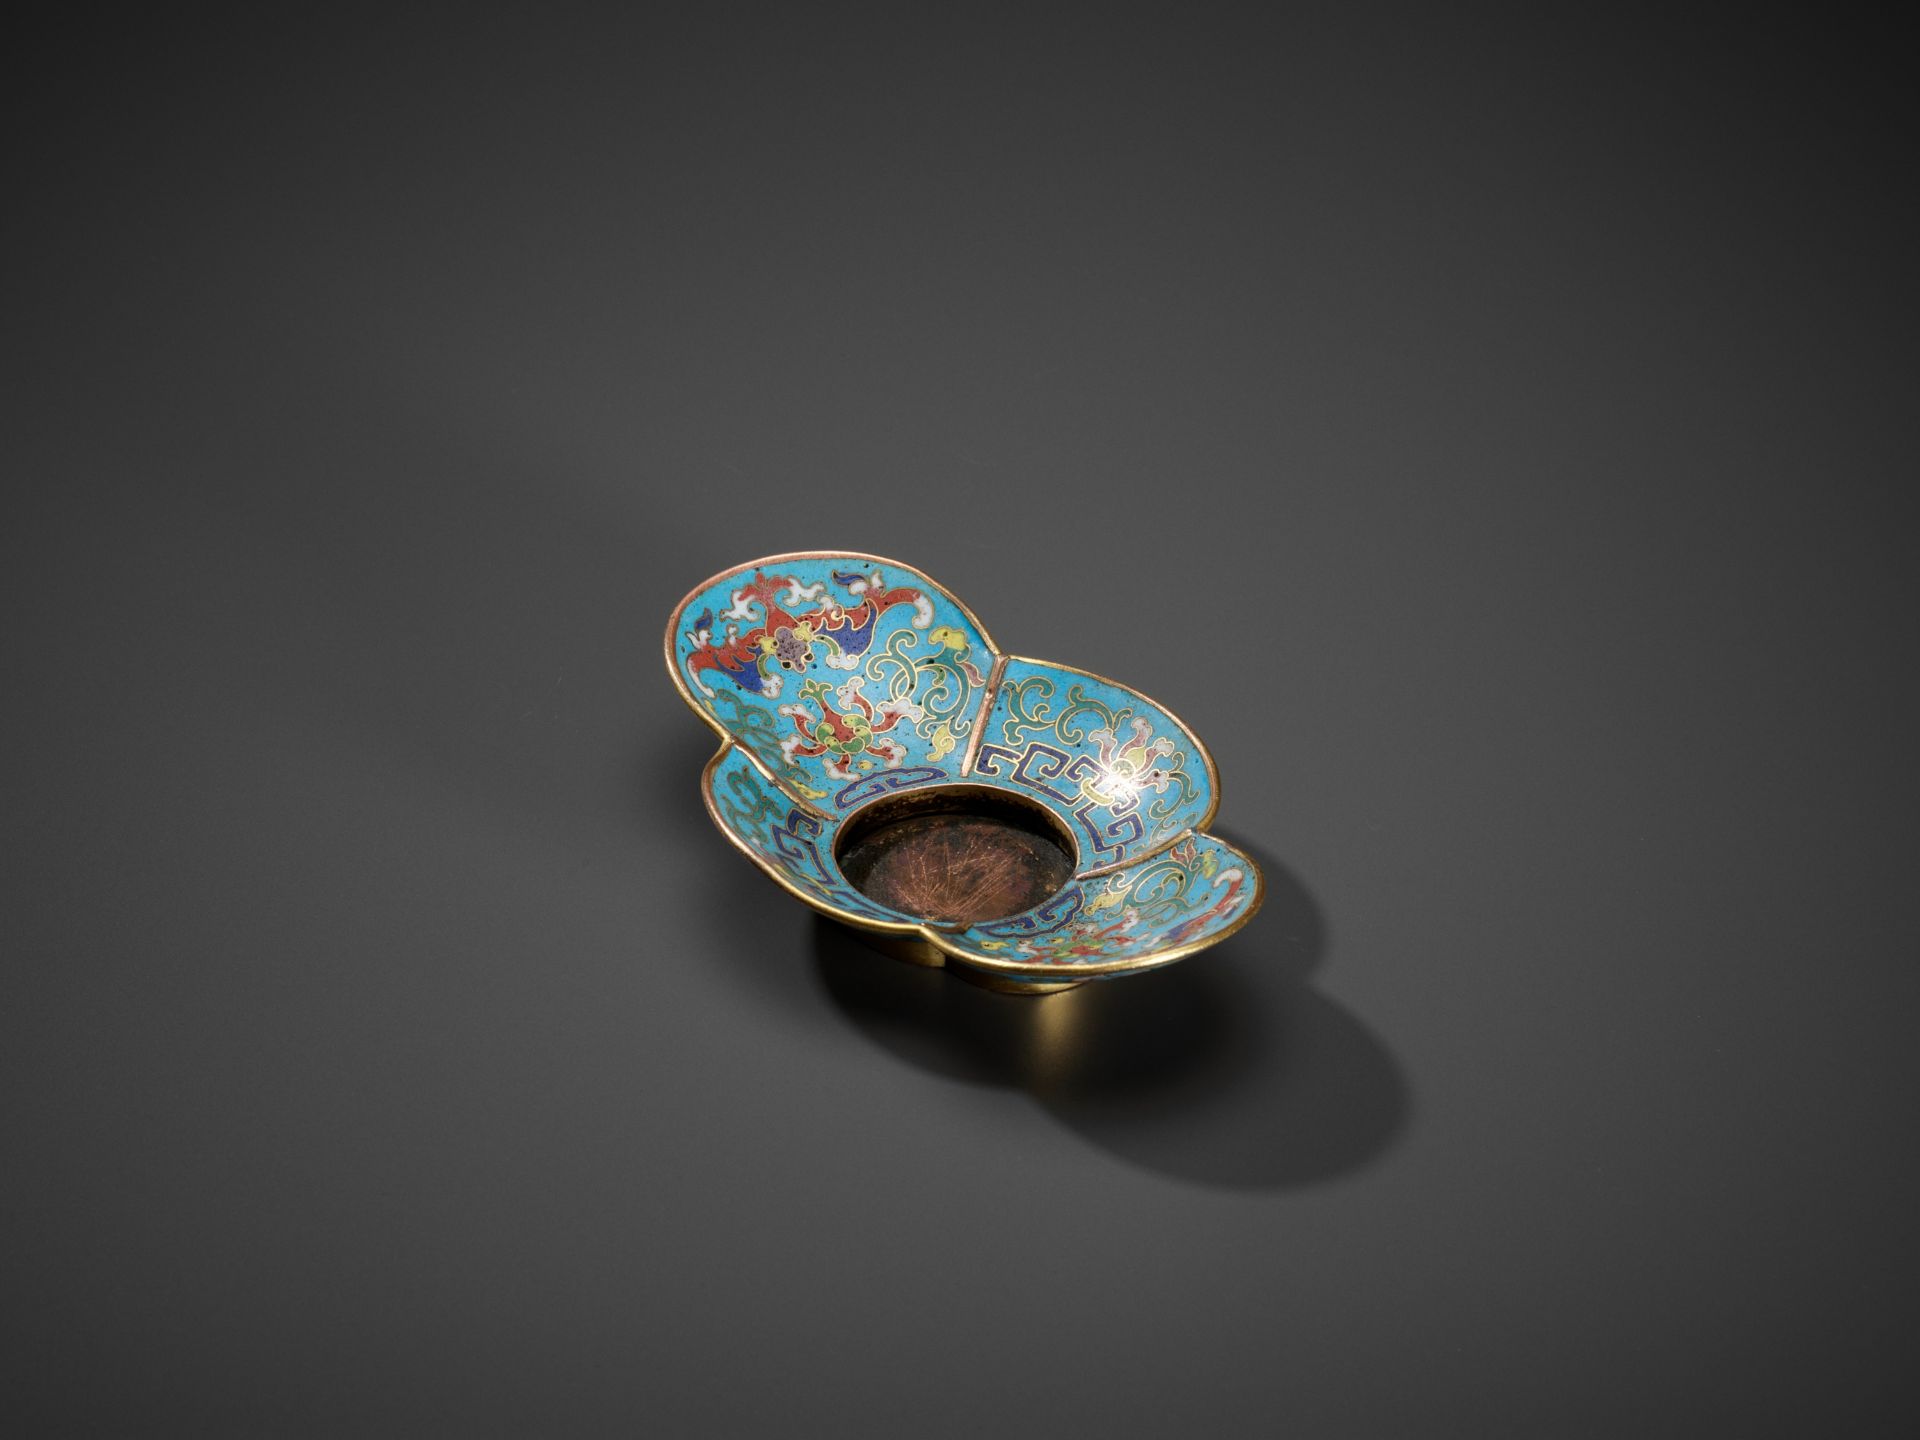 A GILT-COPPER CLOISONNE QUADRILOBED CUP STAND, 18TH CENTURY - Image 6 of 9